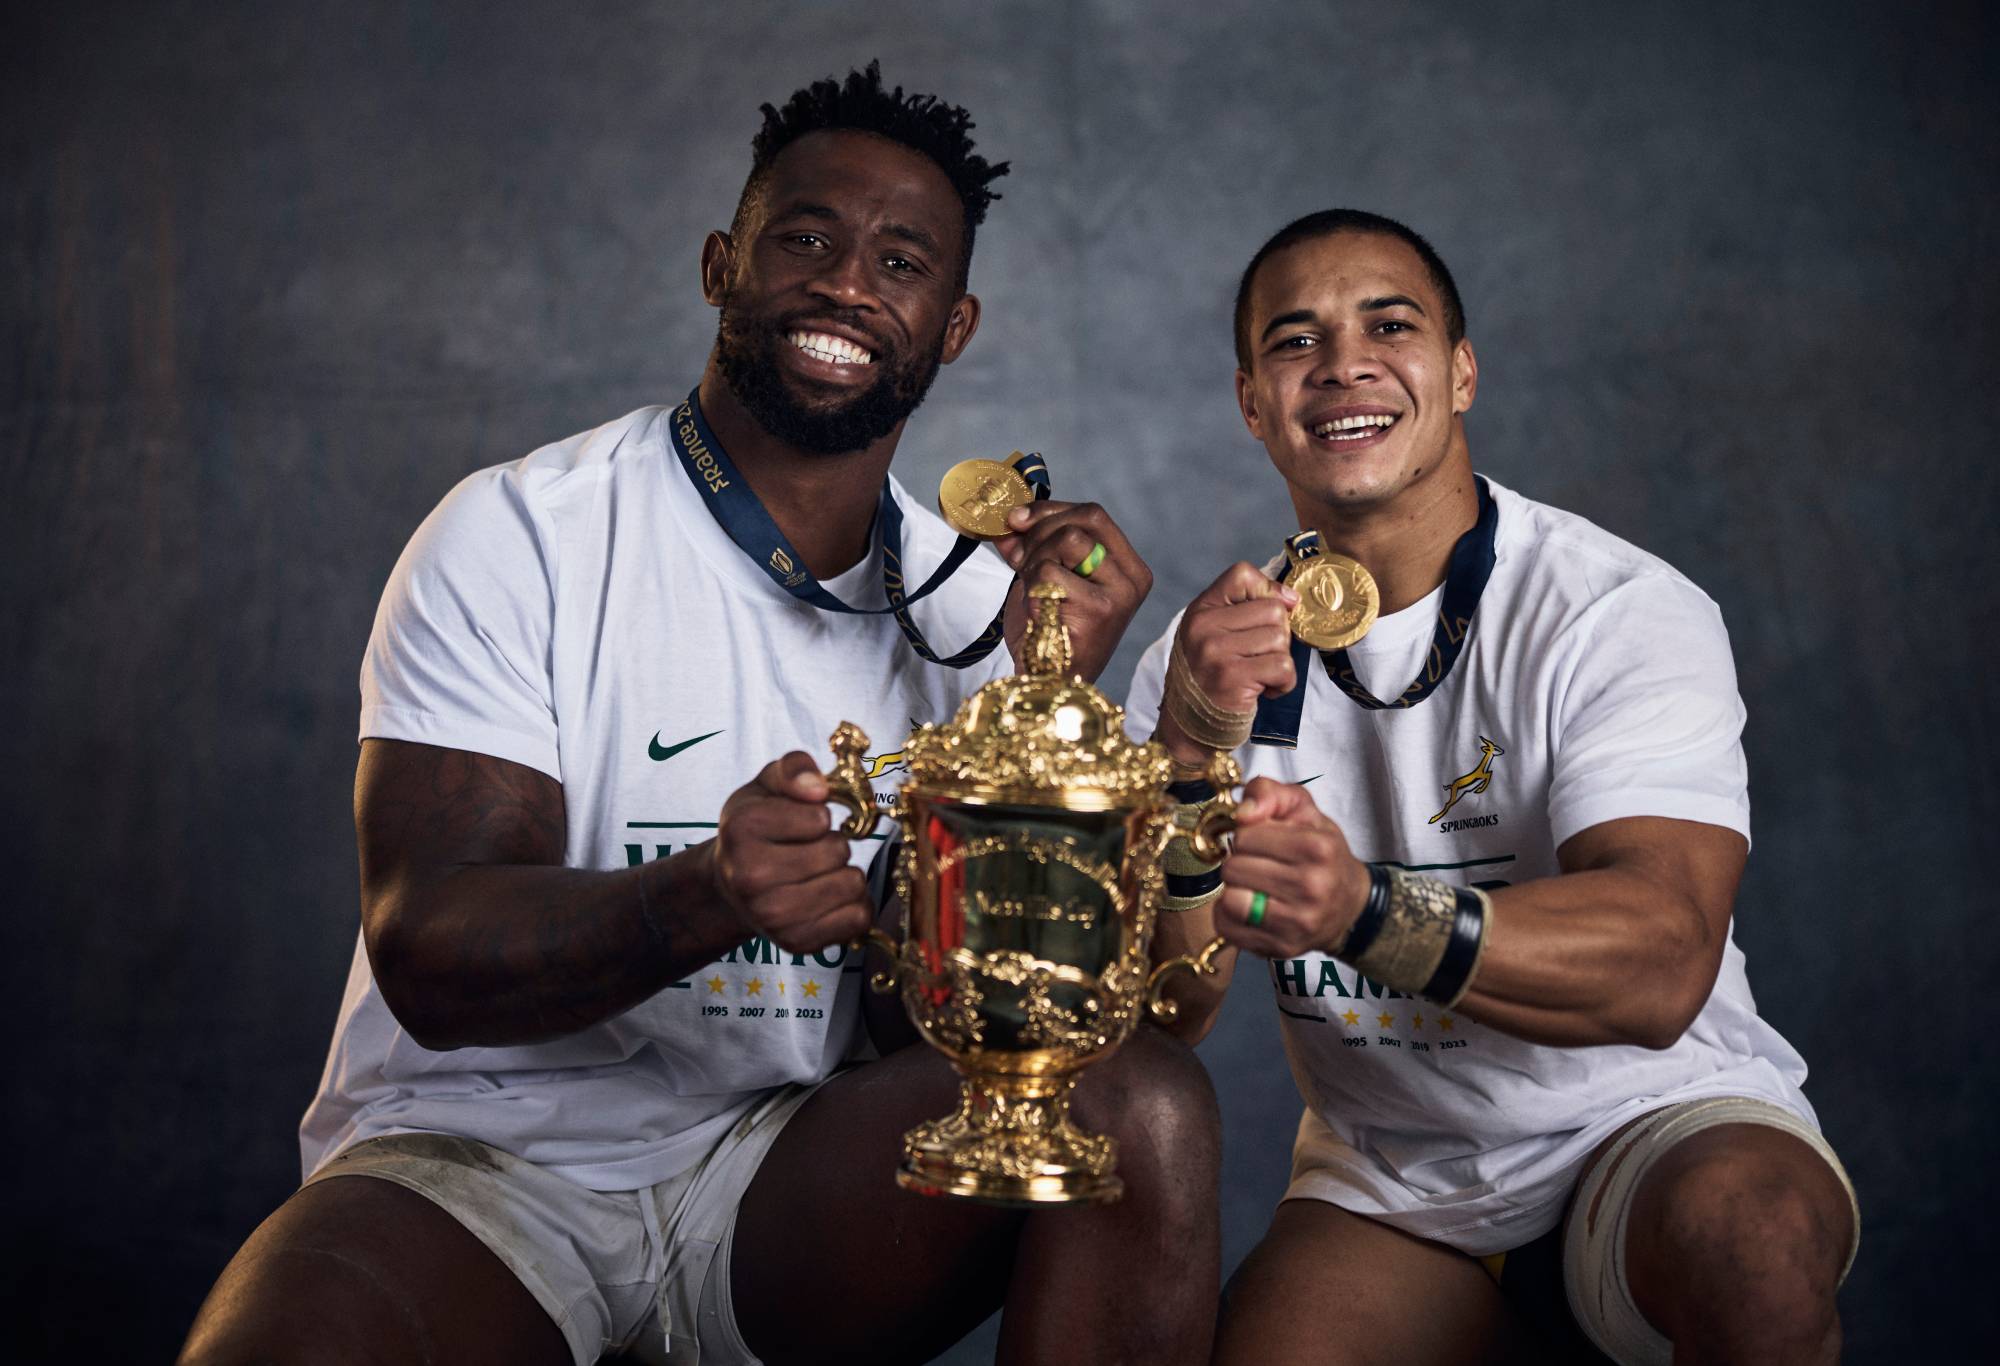 Siya Kolisi and Cheslin Kolbe of South Africa pose with the Webb Ellis Cup during the South Africa Winners Portrait shoot after the Rugby World Cup Final match between New Zealand and South Africa at Stade de France on October 29, 2023 in Paris, France. (Photo by Adam Pretty - World Rugby/World Rugby via Getty Images)